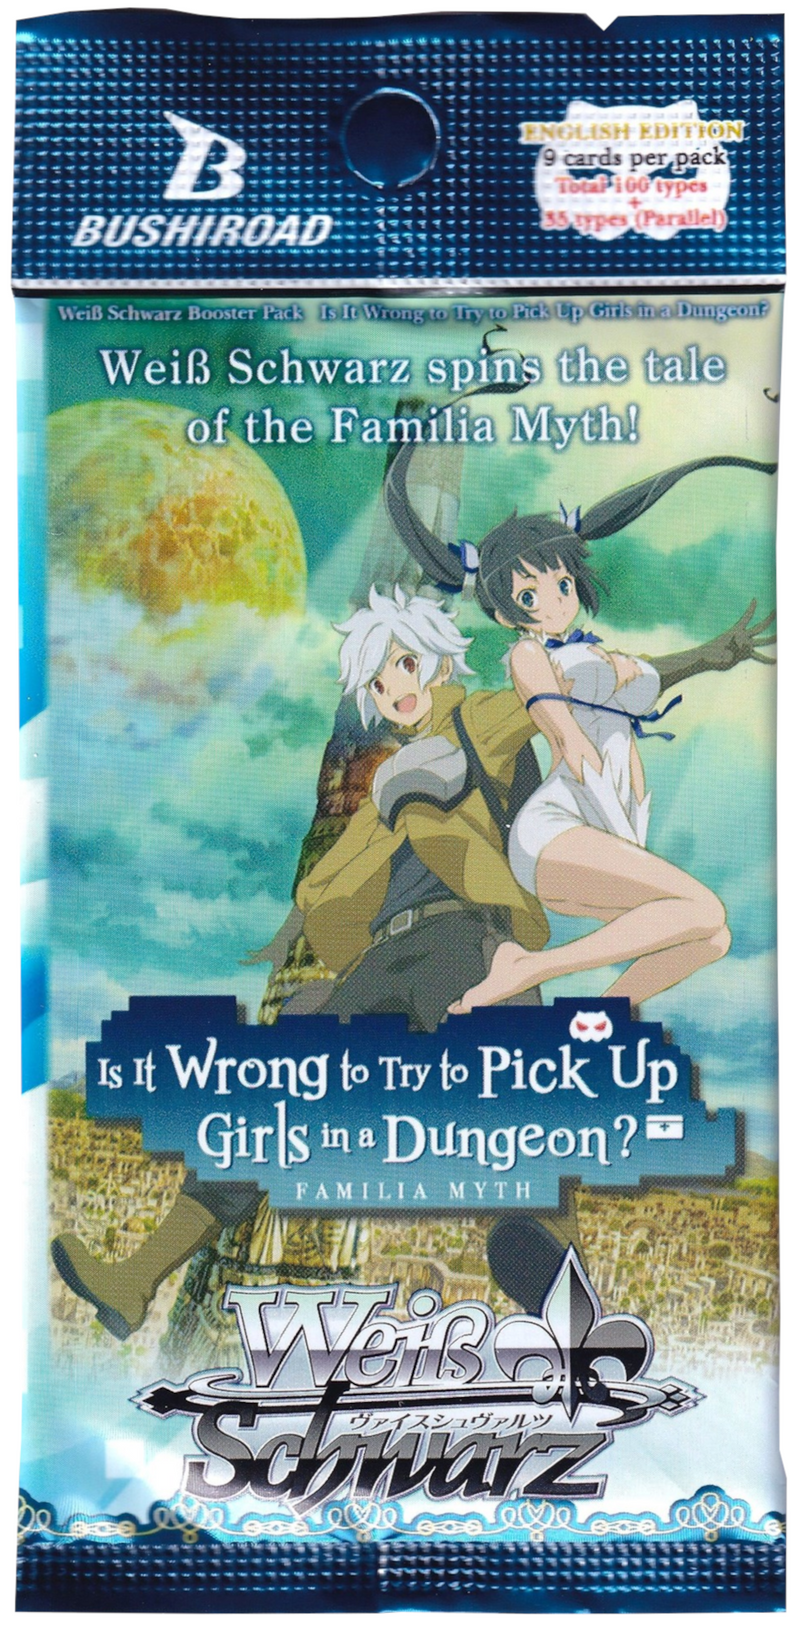 Is it Wrong to Try to Pick Up Girls in a Dungeon? - Booster Pack